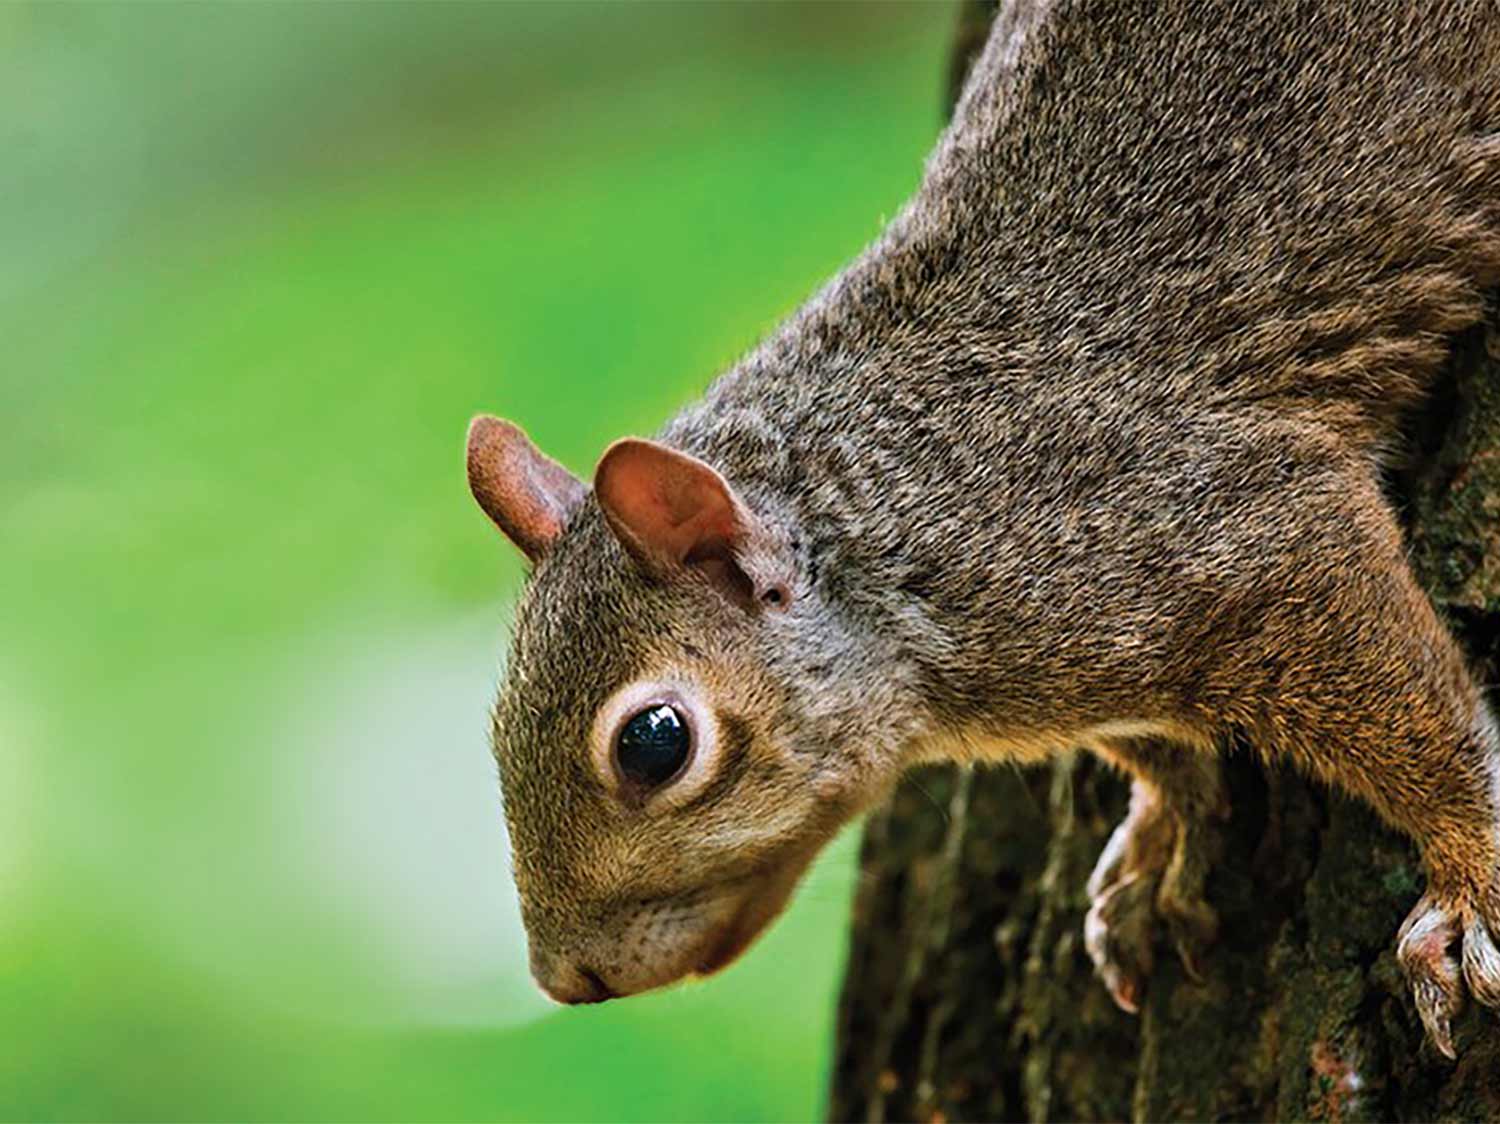 A close up image of a squirrel on the truck of a tree.